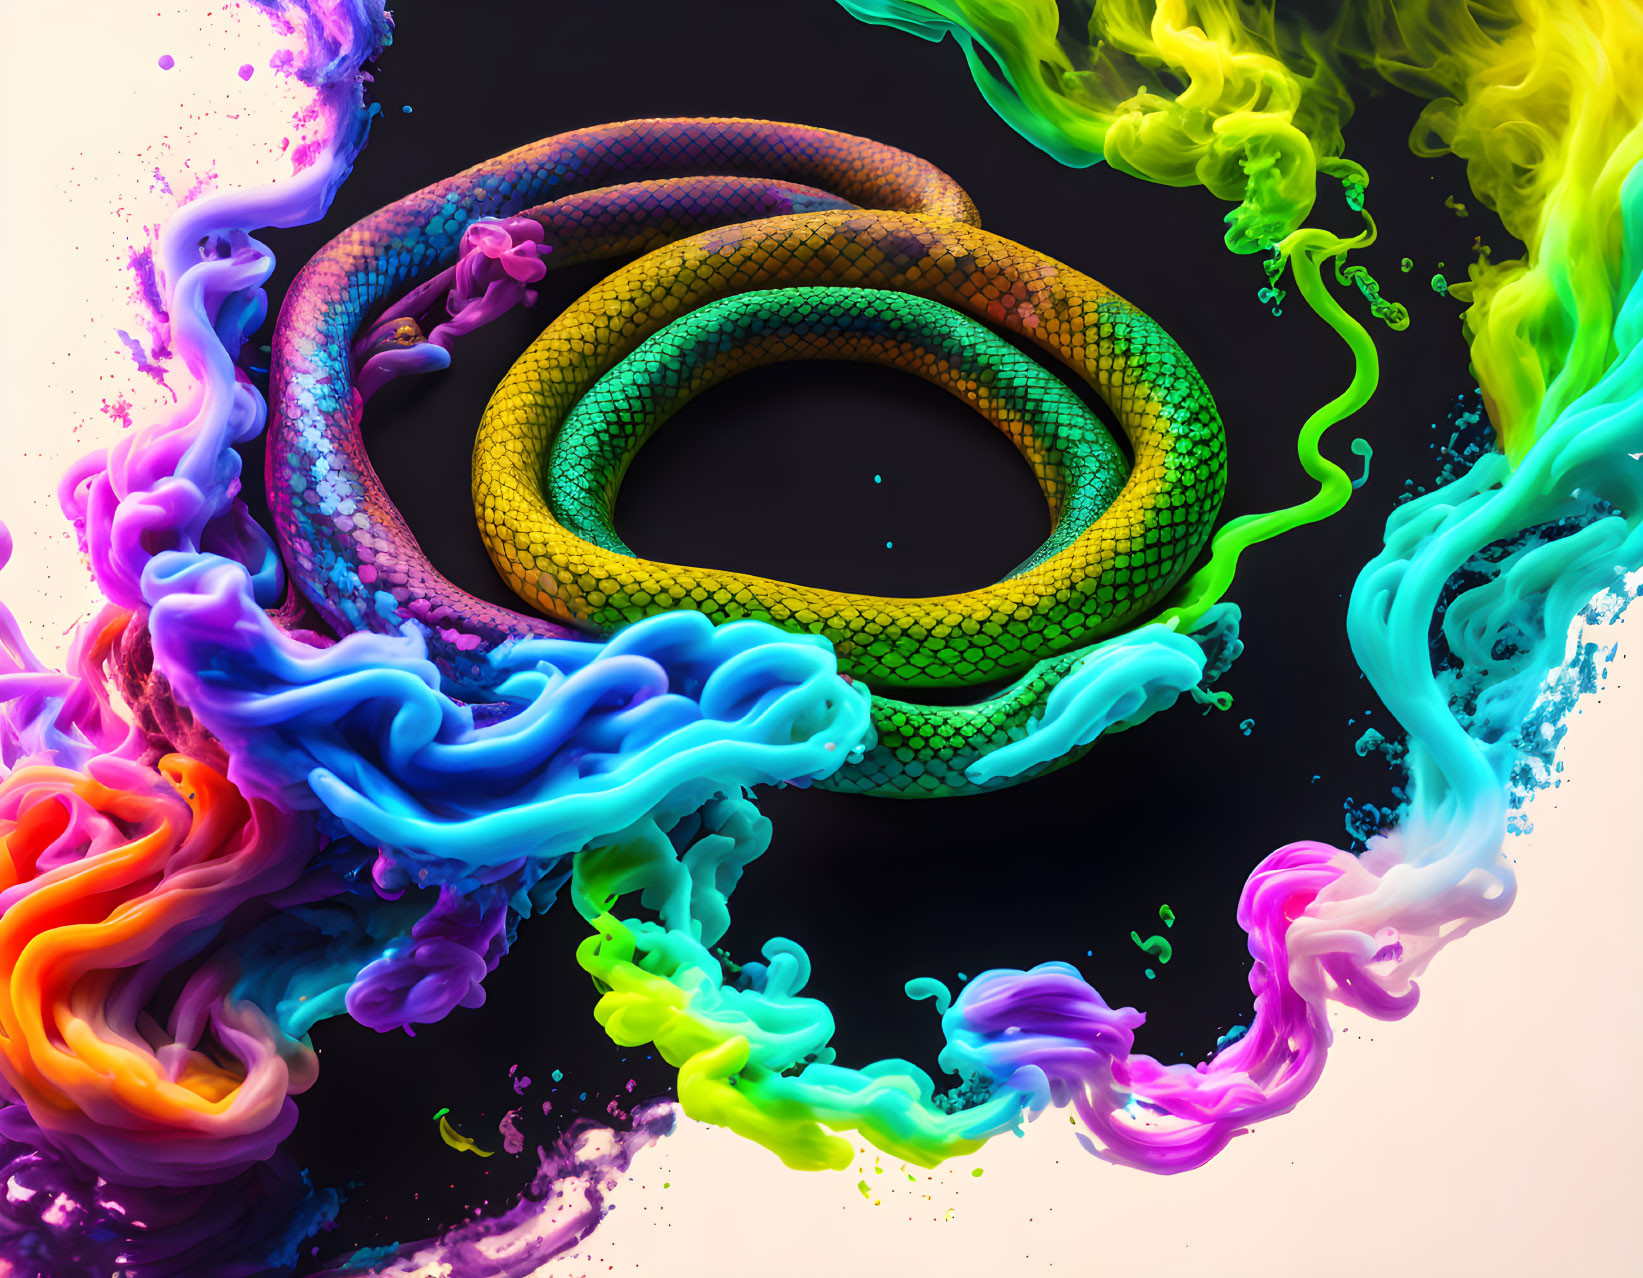 Colorful Coiled Snake Artwork with Ink Swirls on Black Background